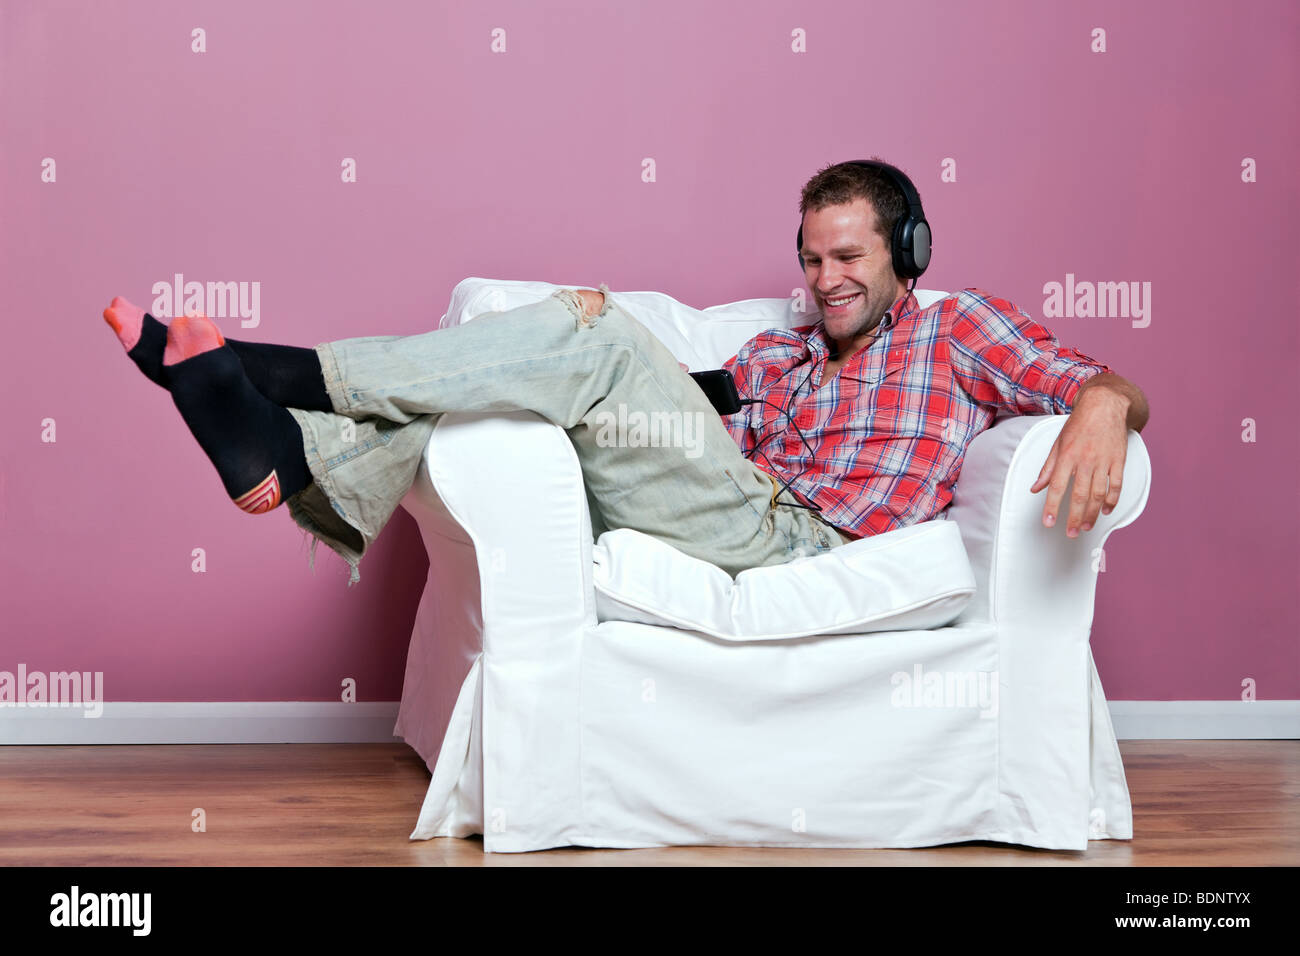 Relaxed male sitting listening to music on his mp3 player Stock Photo